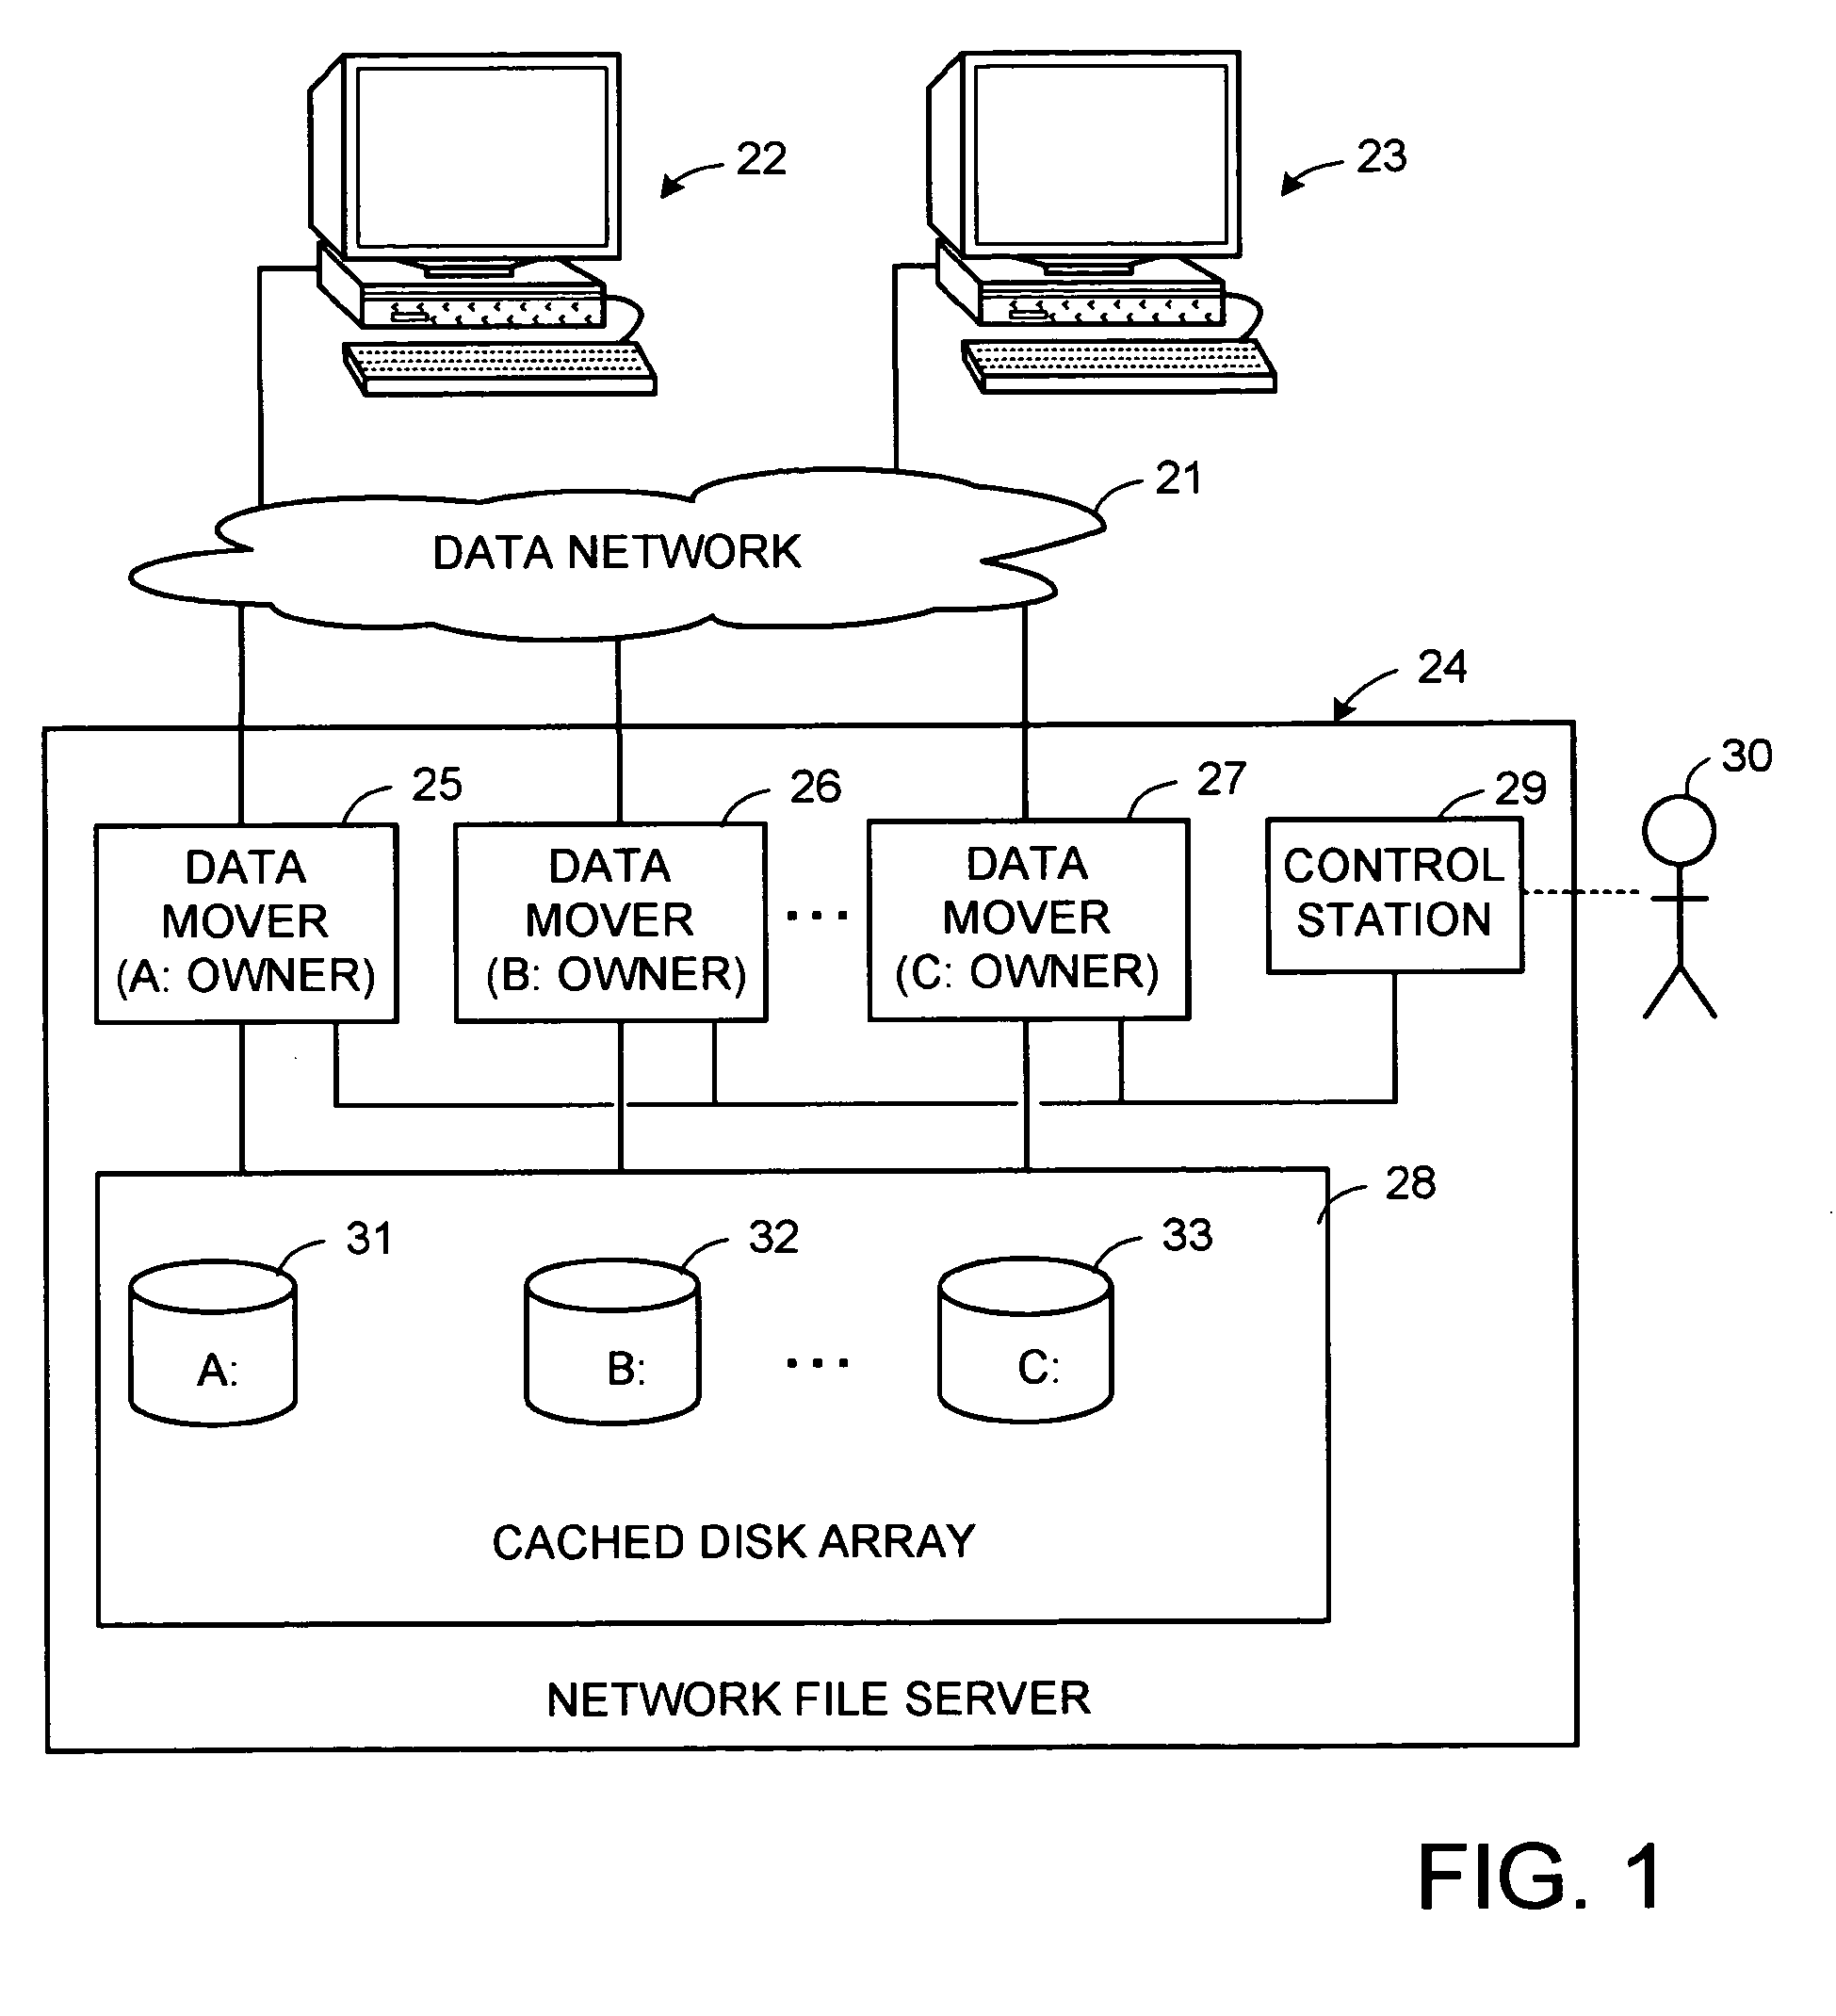 Lock management for concurrent access to a single file from multiple data mover computers